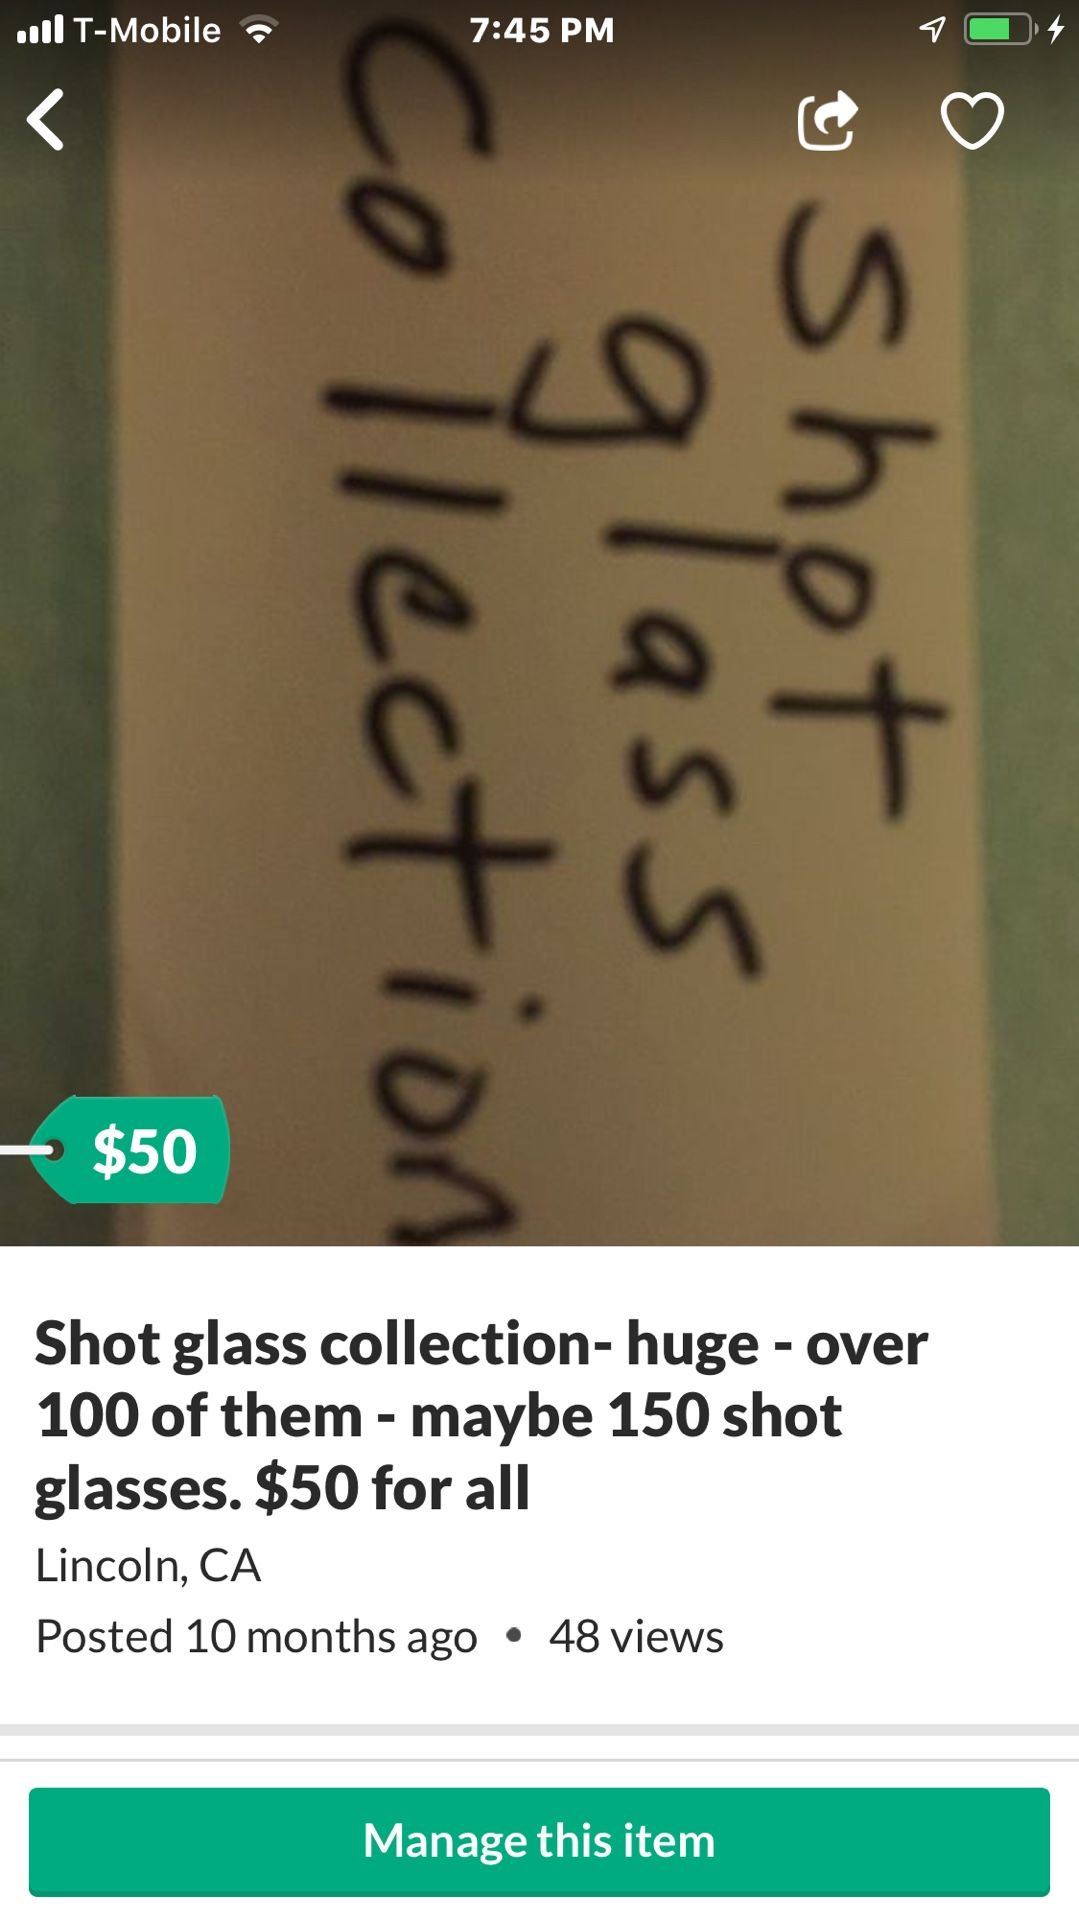 Shot glass collection- over 100, maybe 150 various shot glasses from everywhere. $50 for all